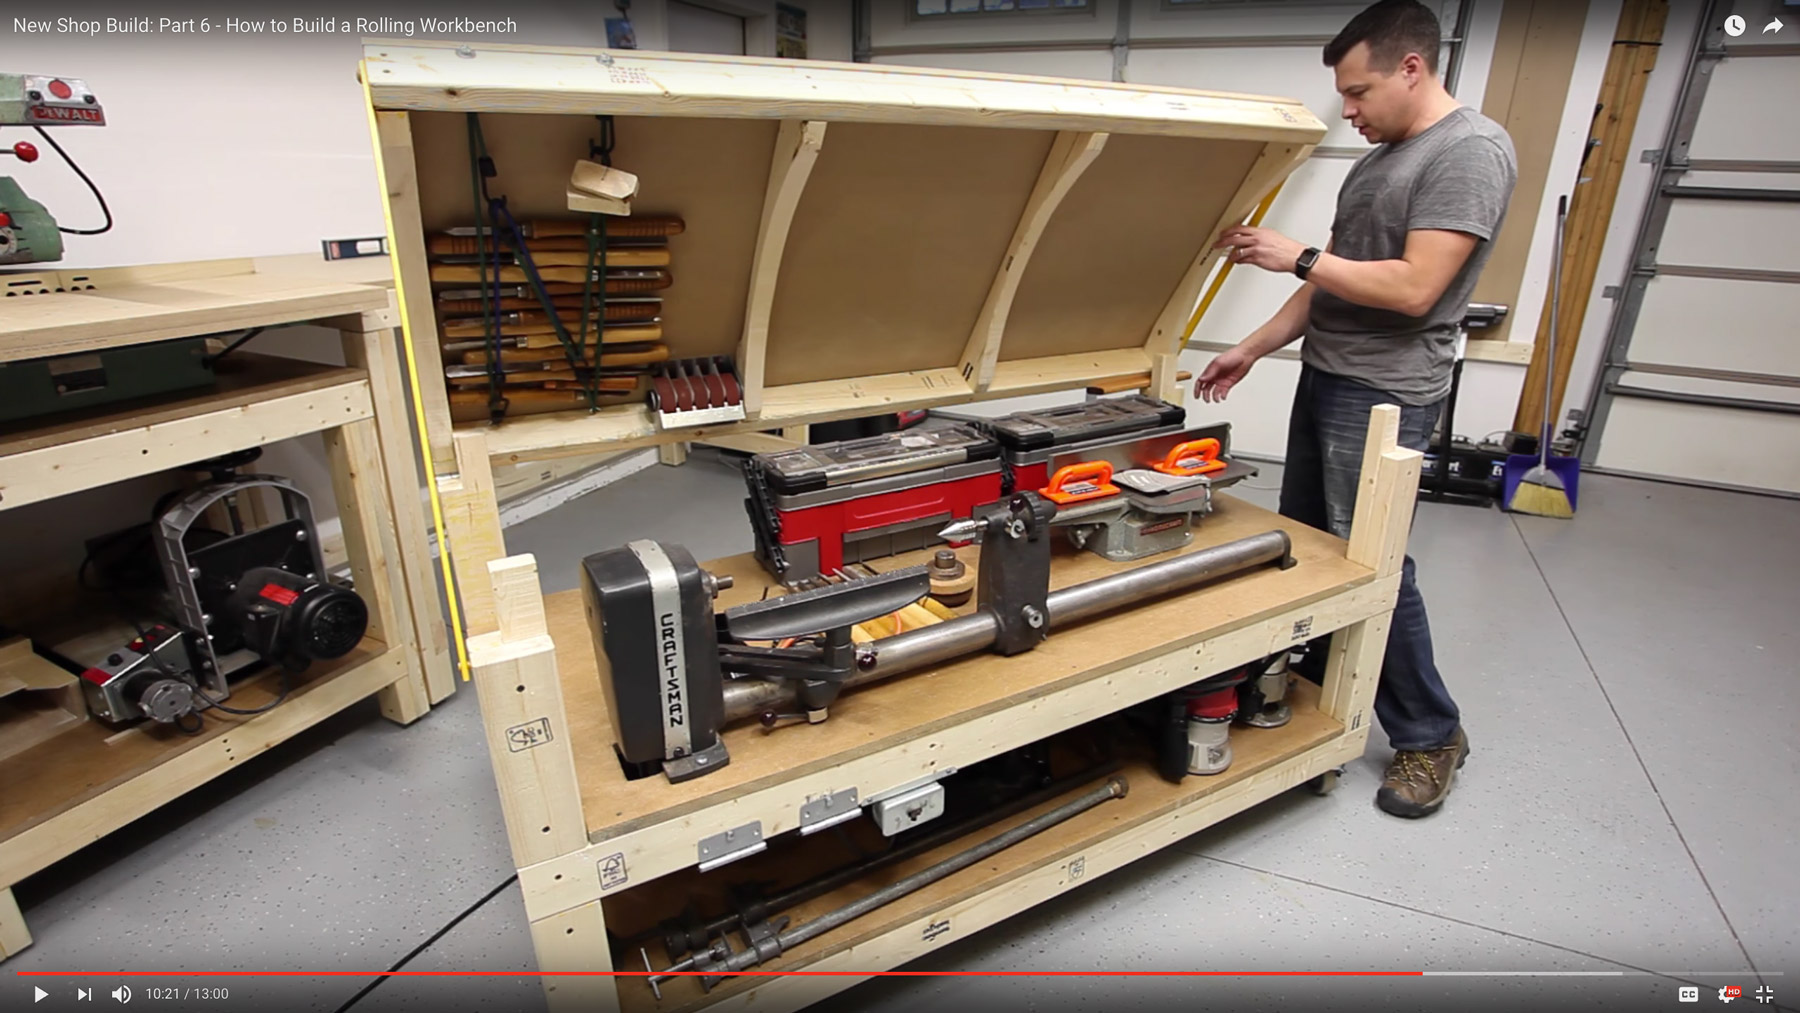 Workbench Plans - Tommy s Rolling Workbench and Miter Saw 